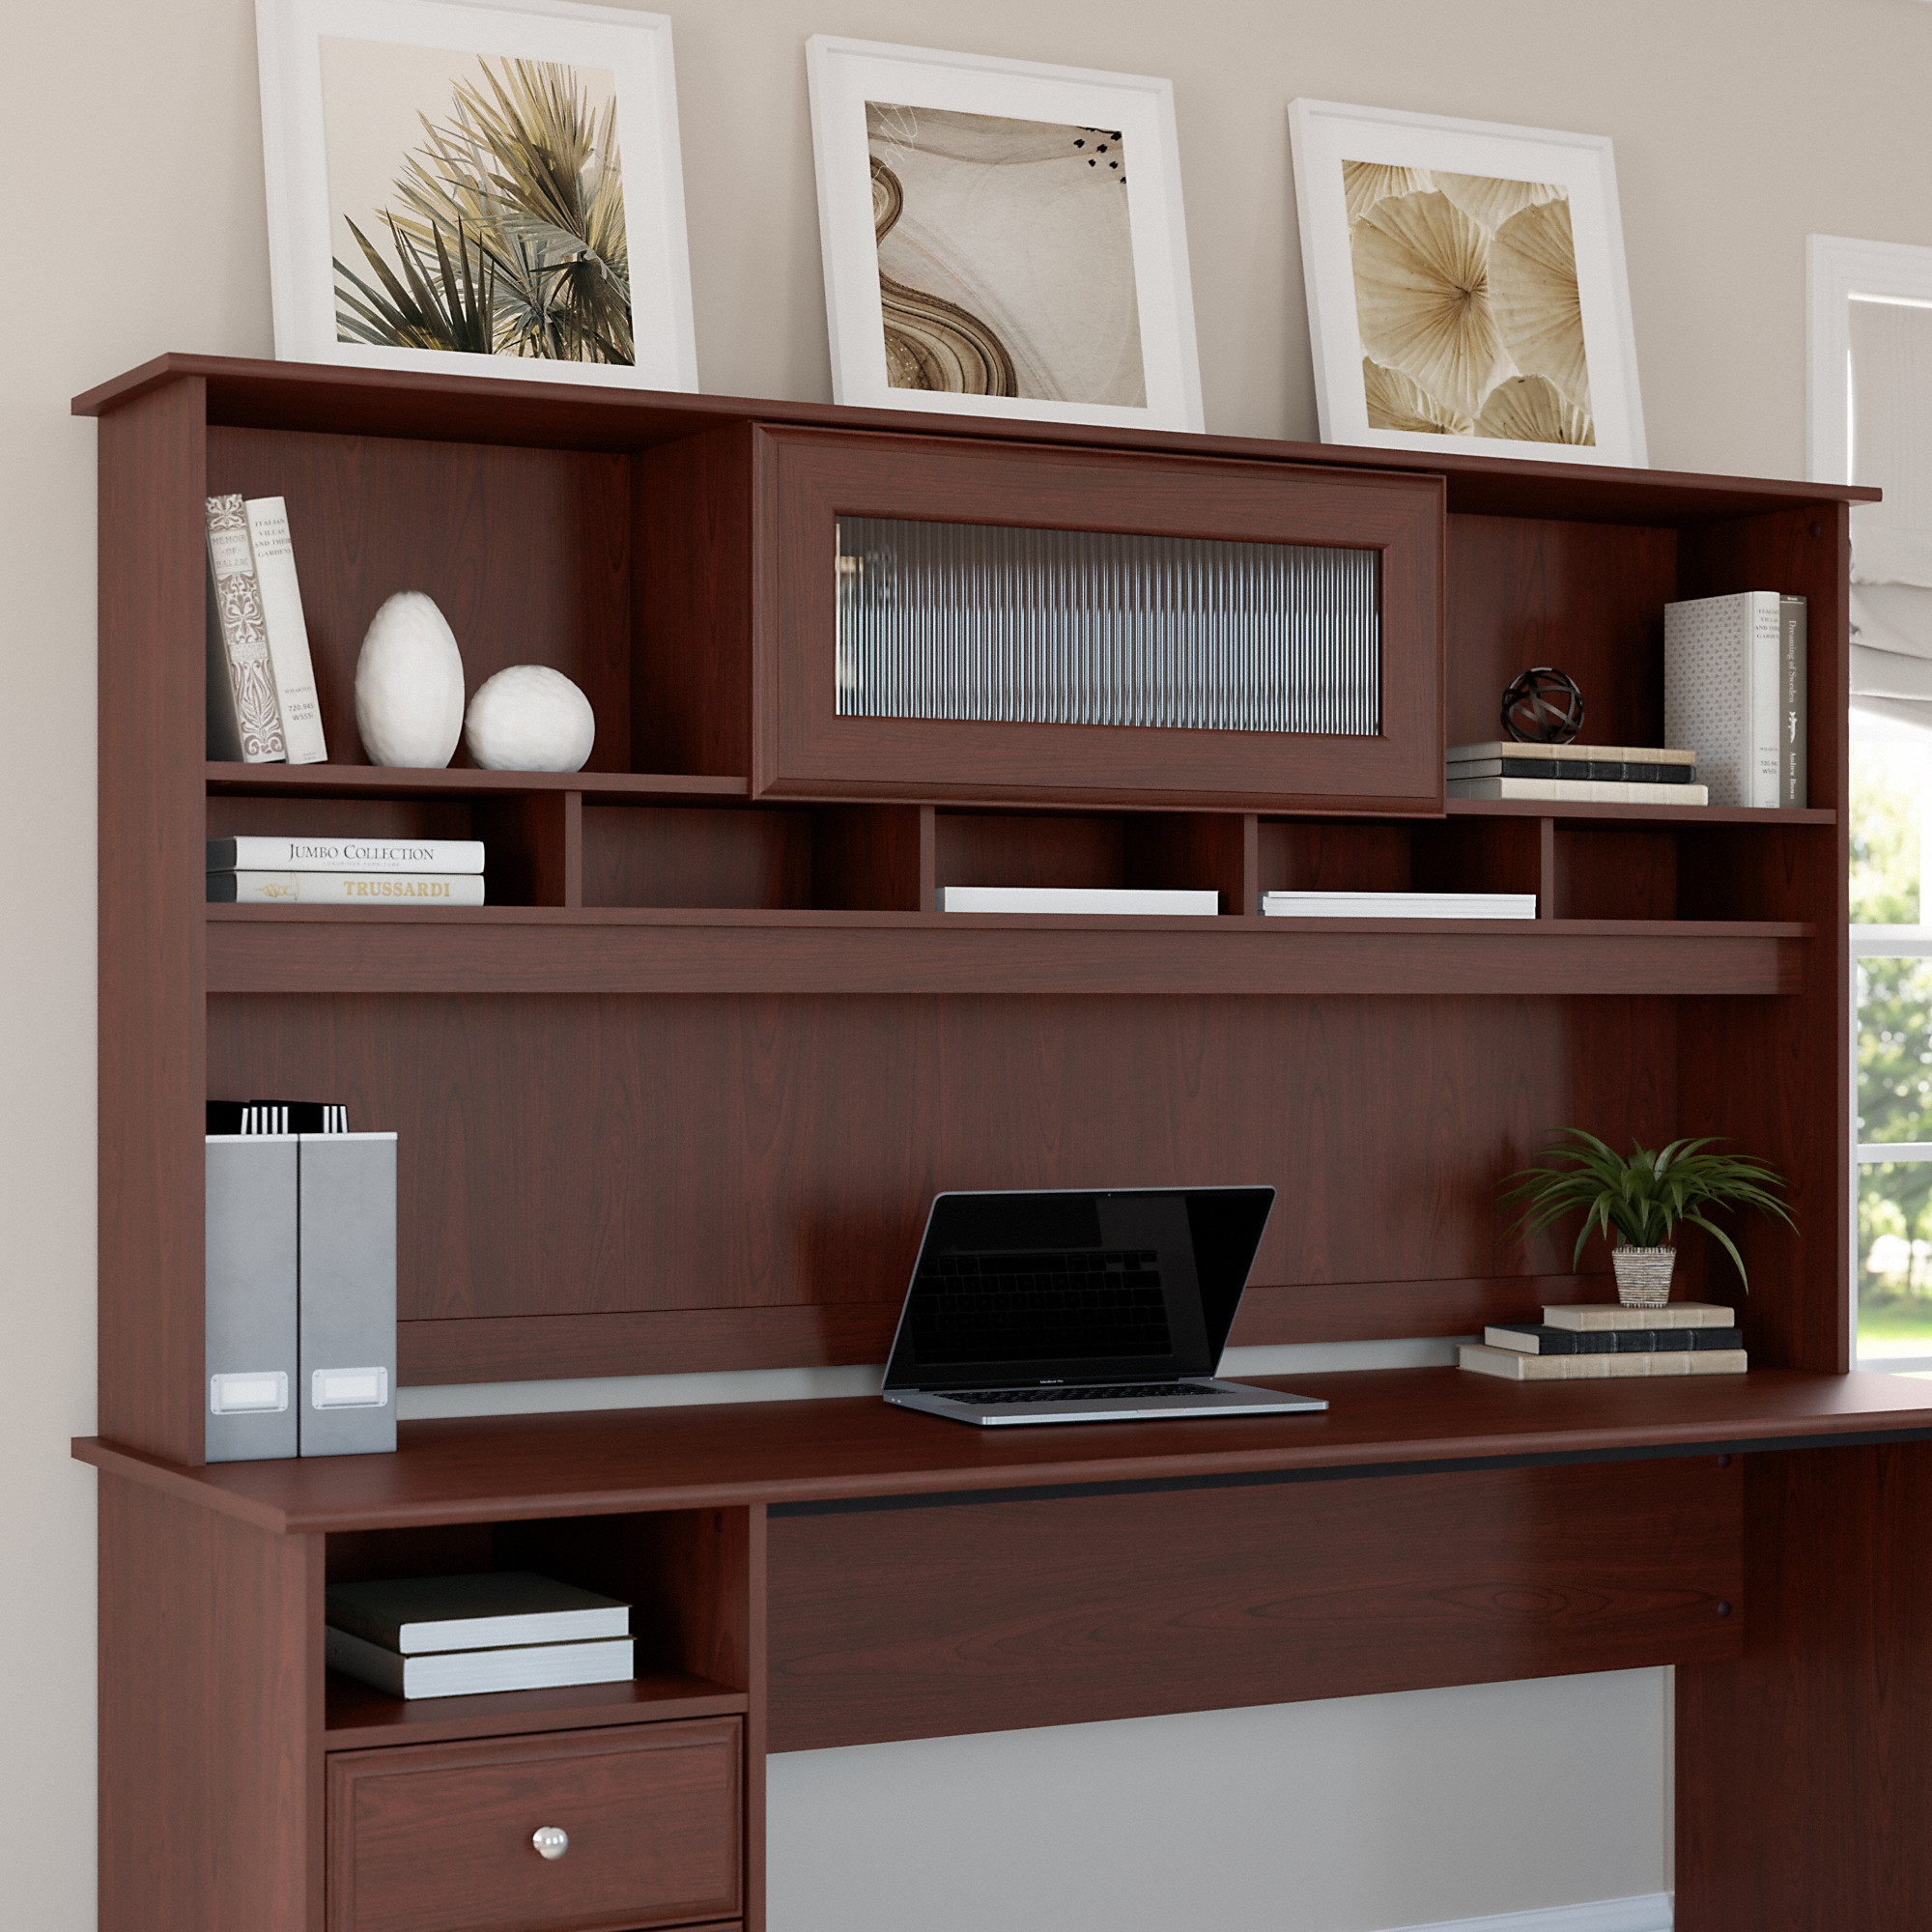 Cabot Modern 72W Hutch with Storage, Fits 72 W Desk (sold separately) in Harvest Cherry - image 1 of 8